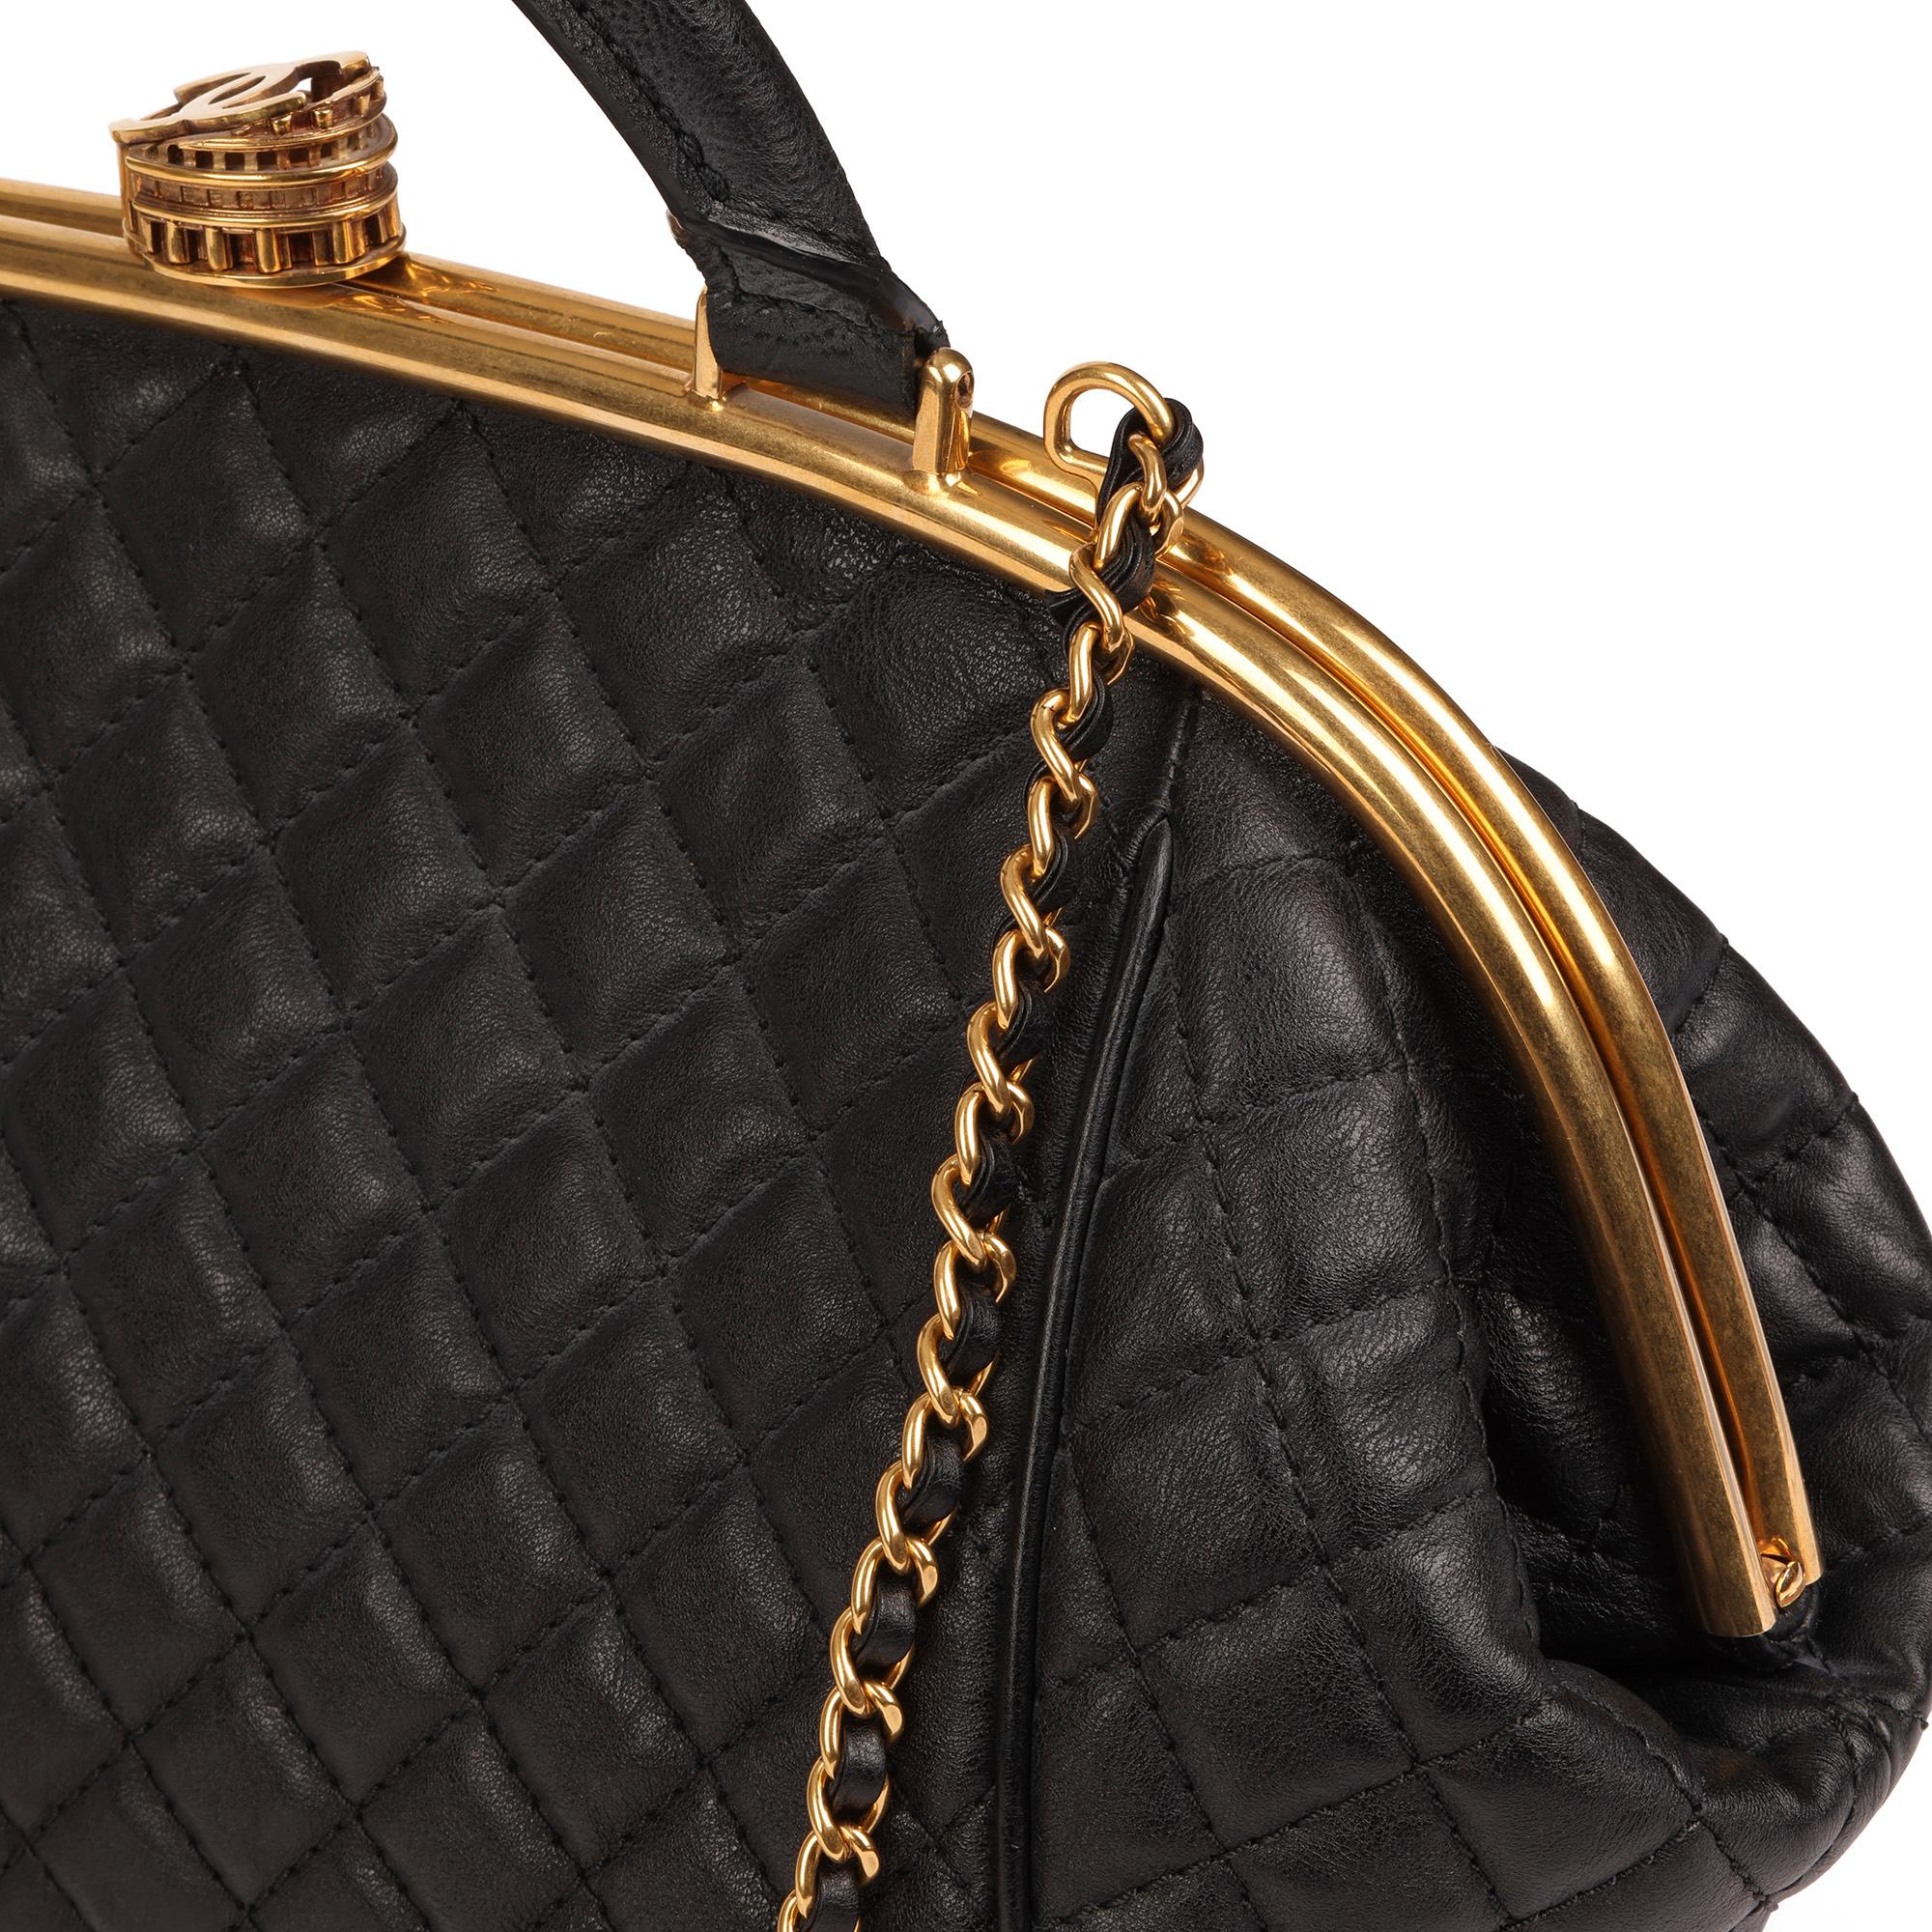 2016 Chanel Black Quilted Calfskin Leather Paris in Rome Colosseum Kiss Lock Bag 3